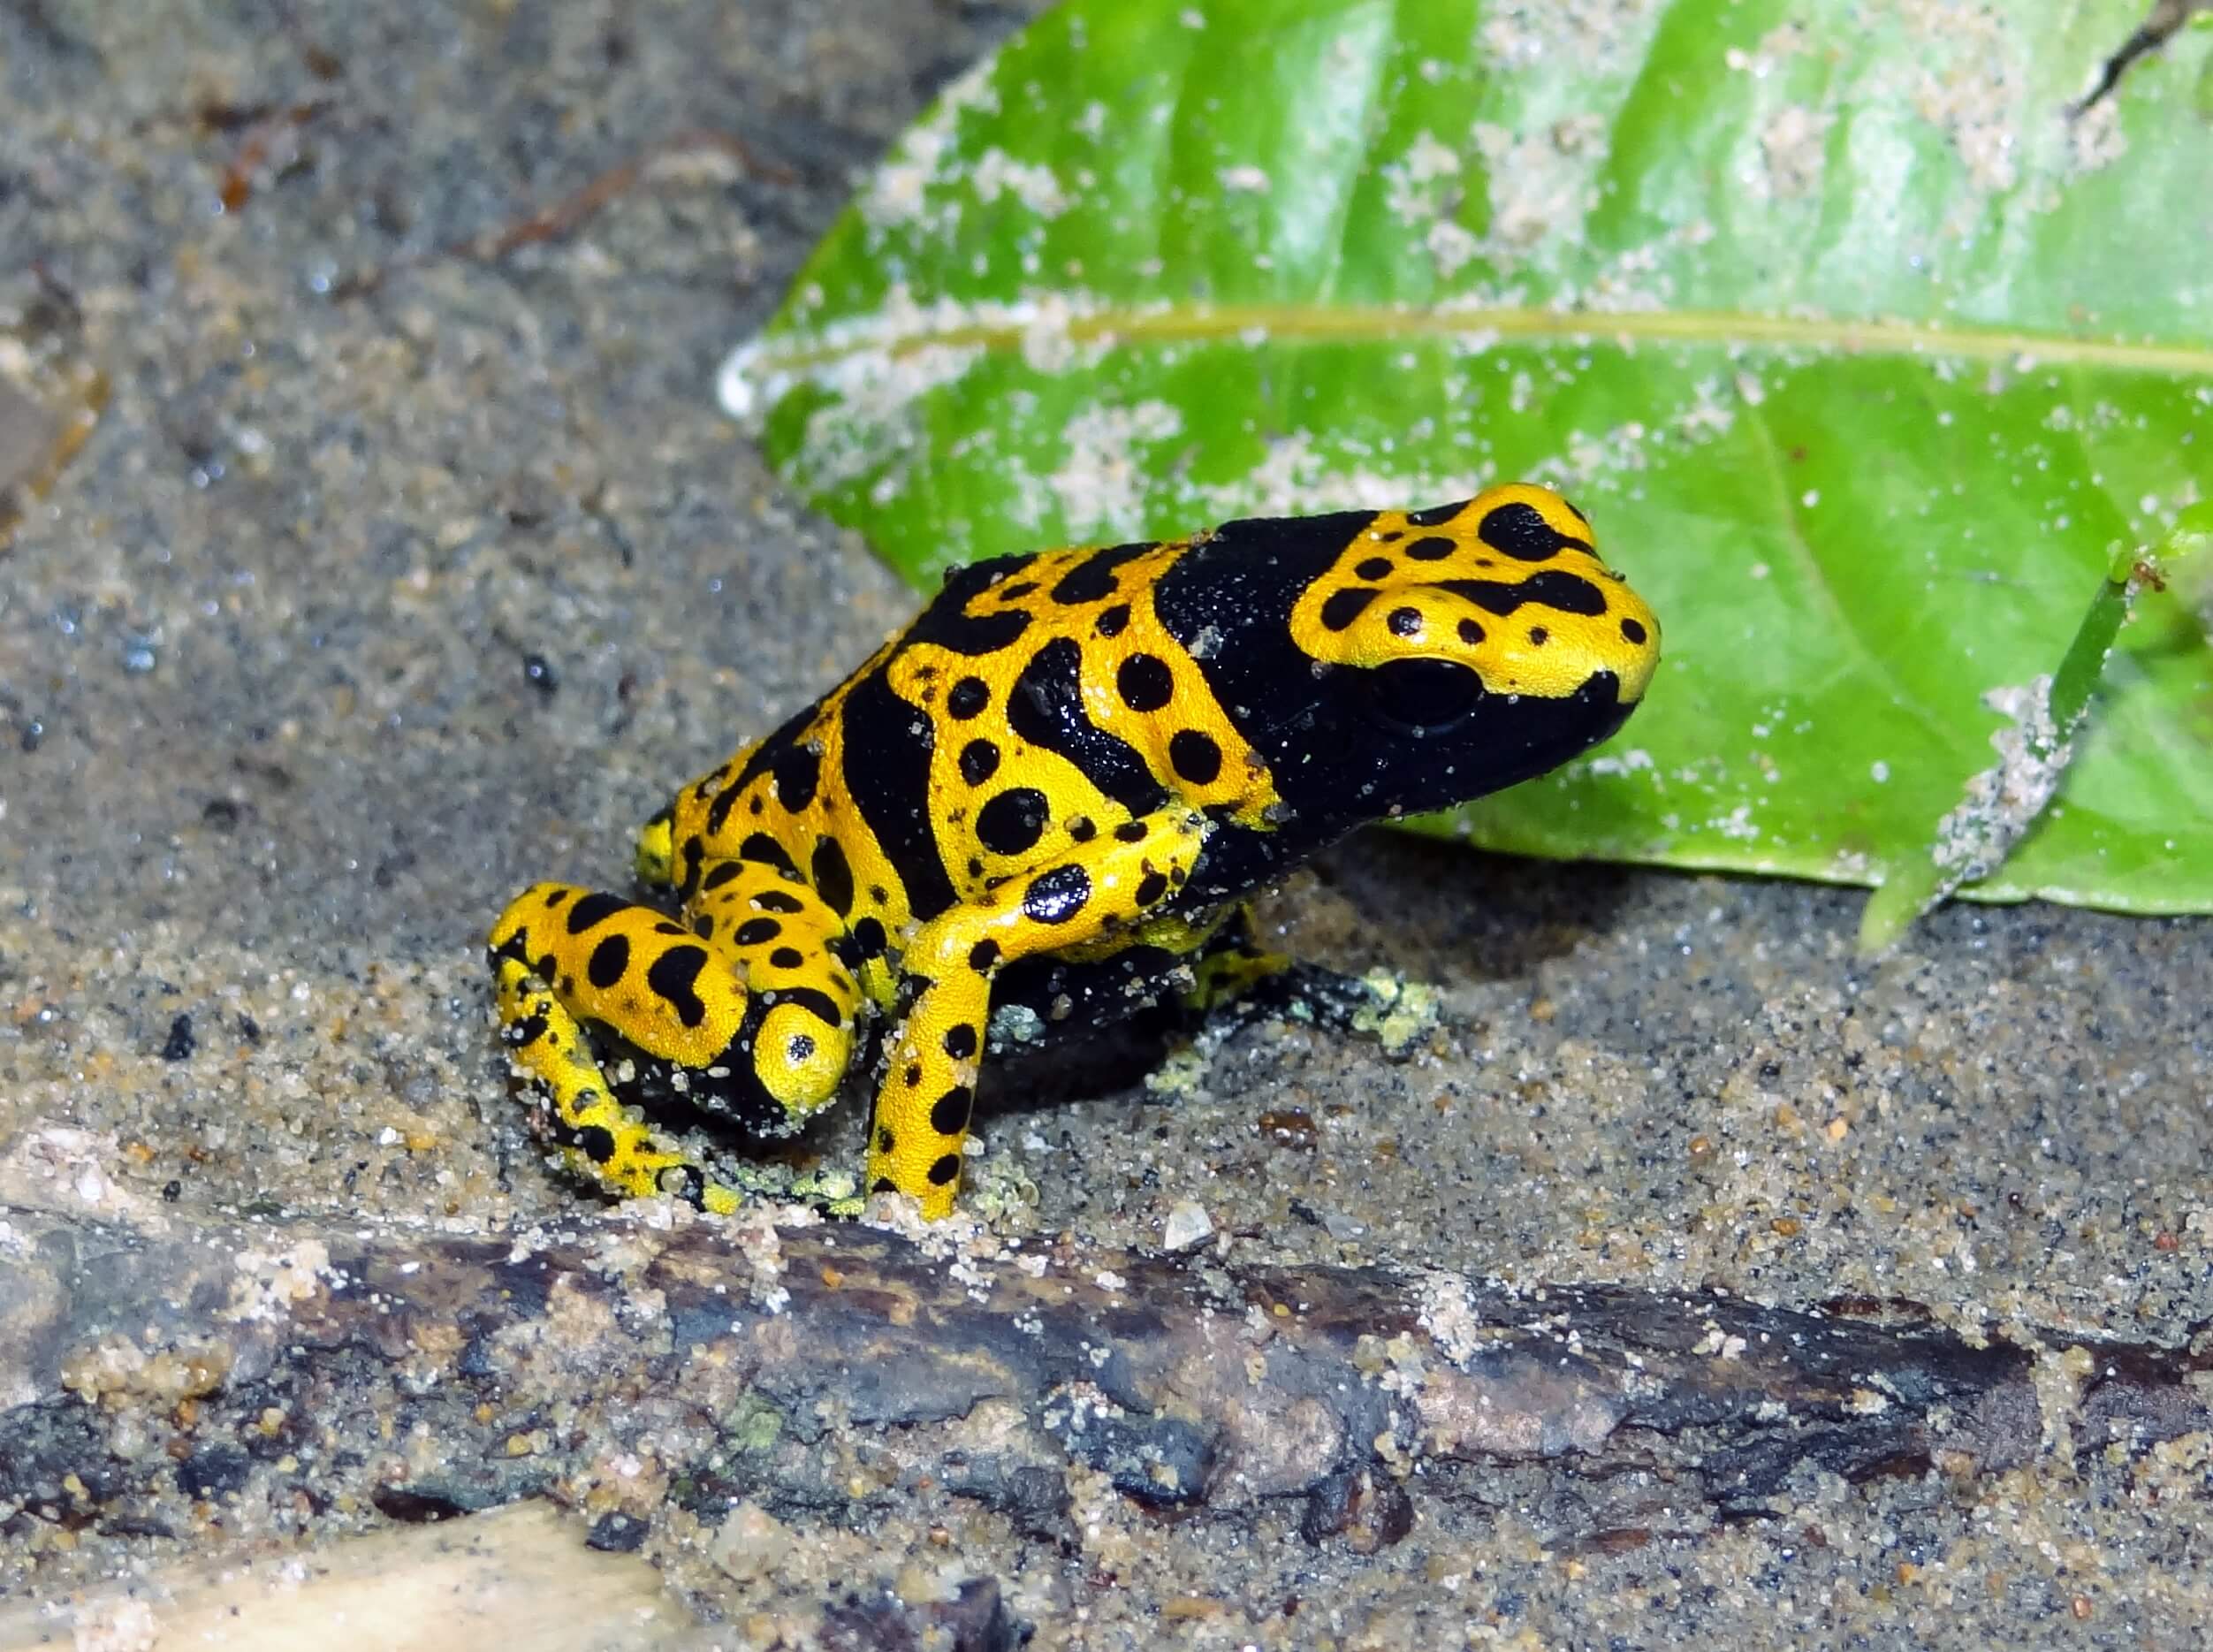 A poison dart frog.